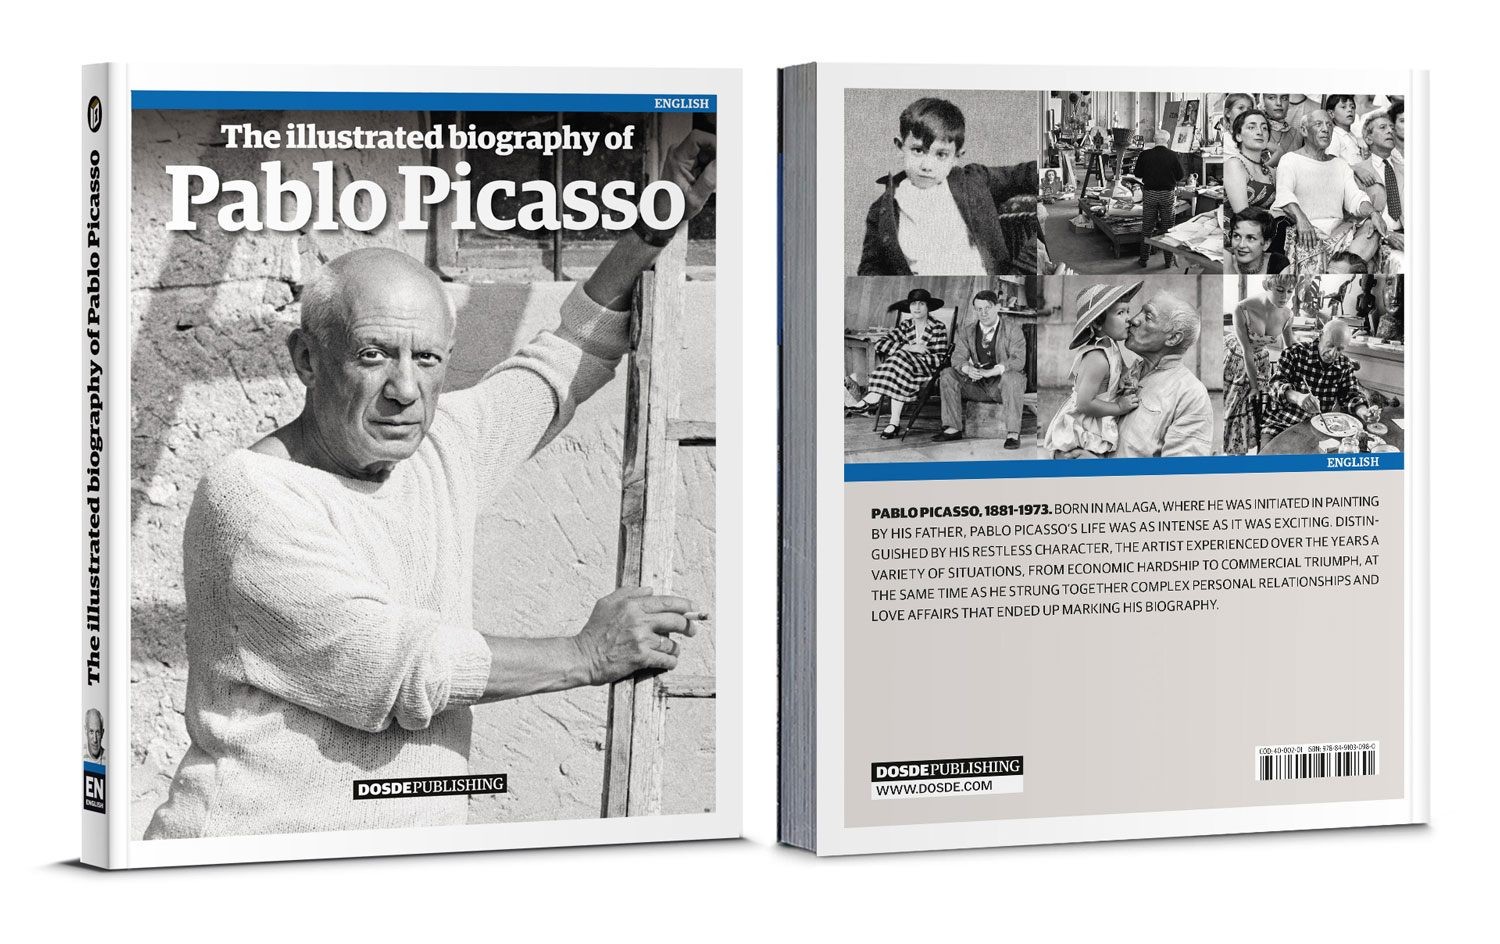 biography of pablo picasso in english